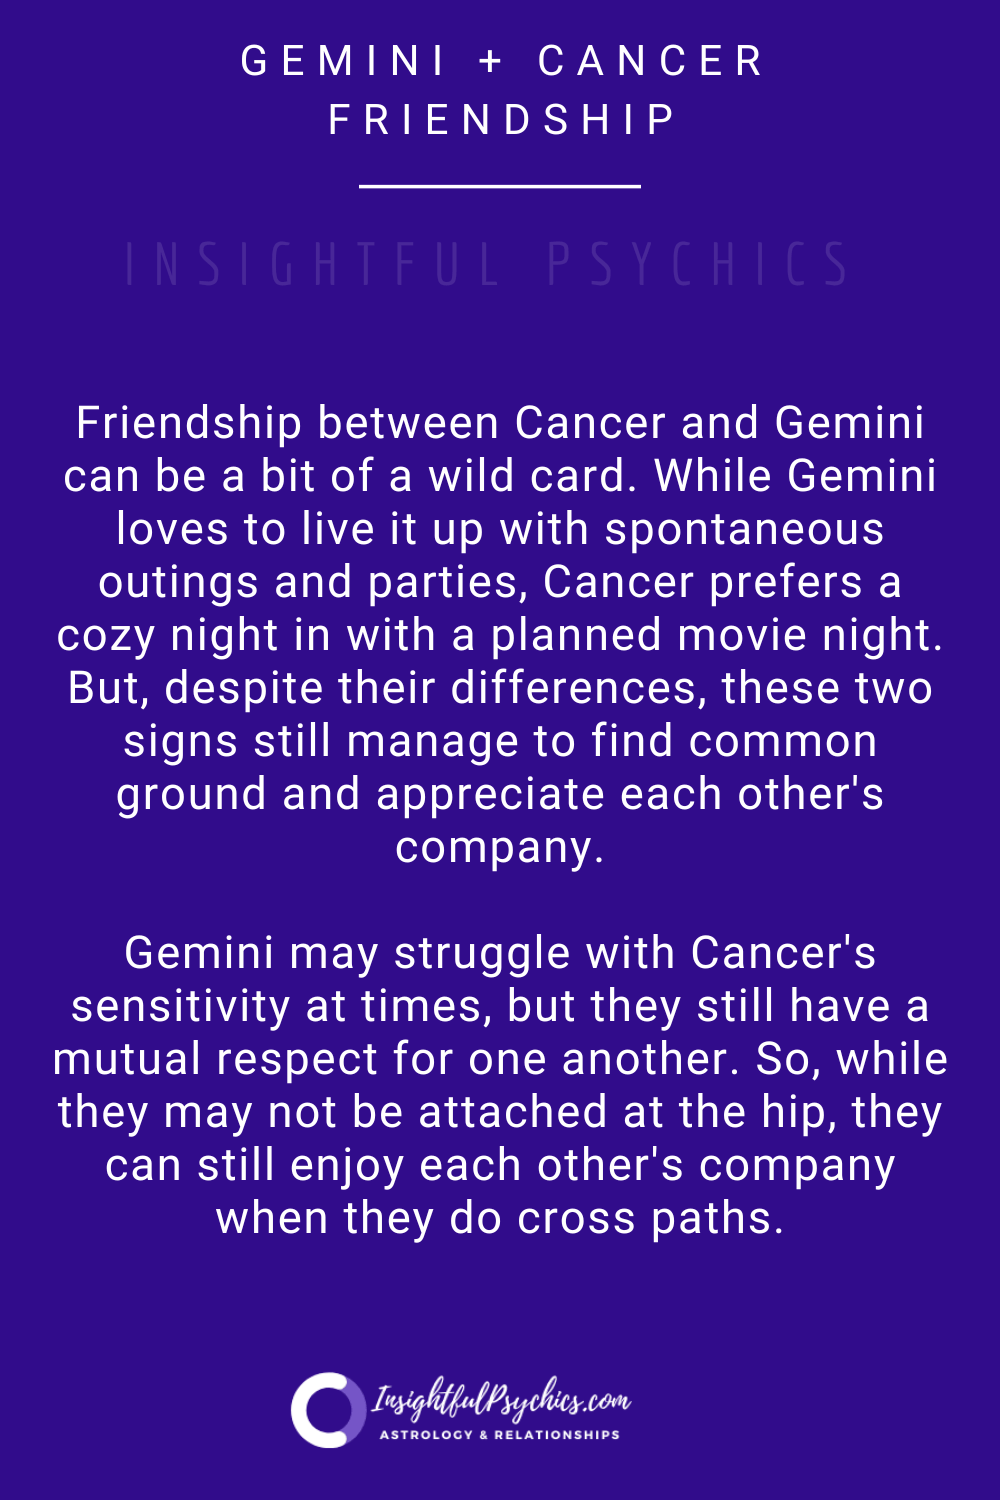 cancer and gemini friendship